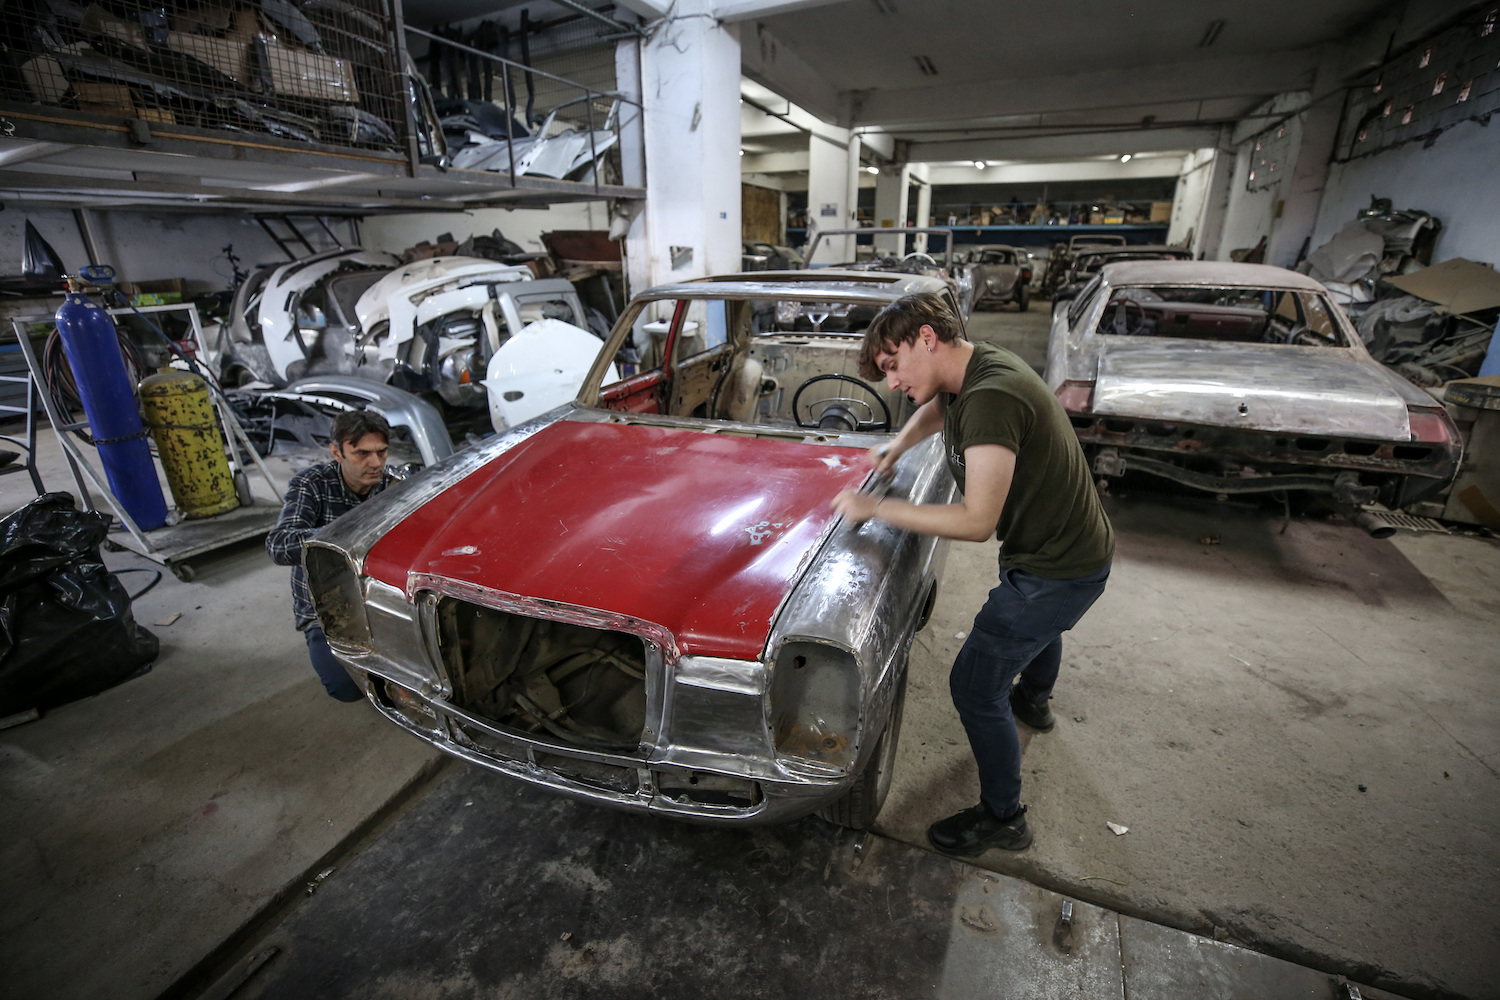 Two men in a crowded auto shop are stripping the paint off a classic car.